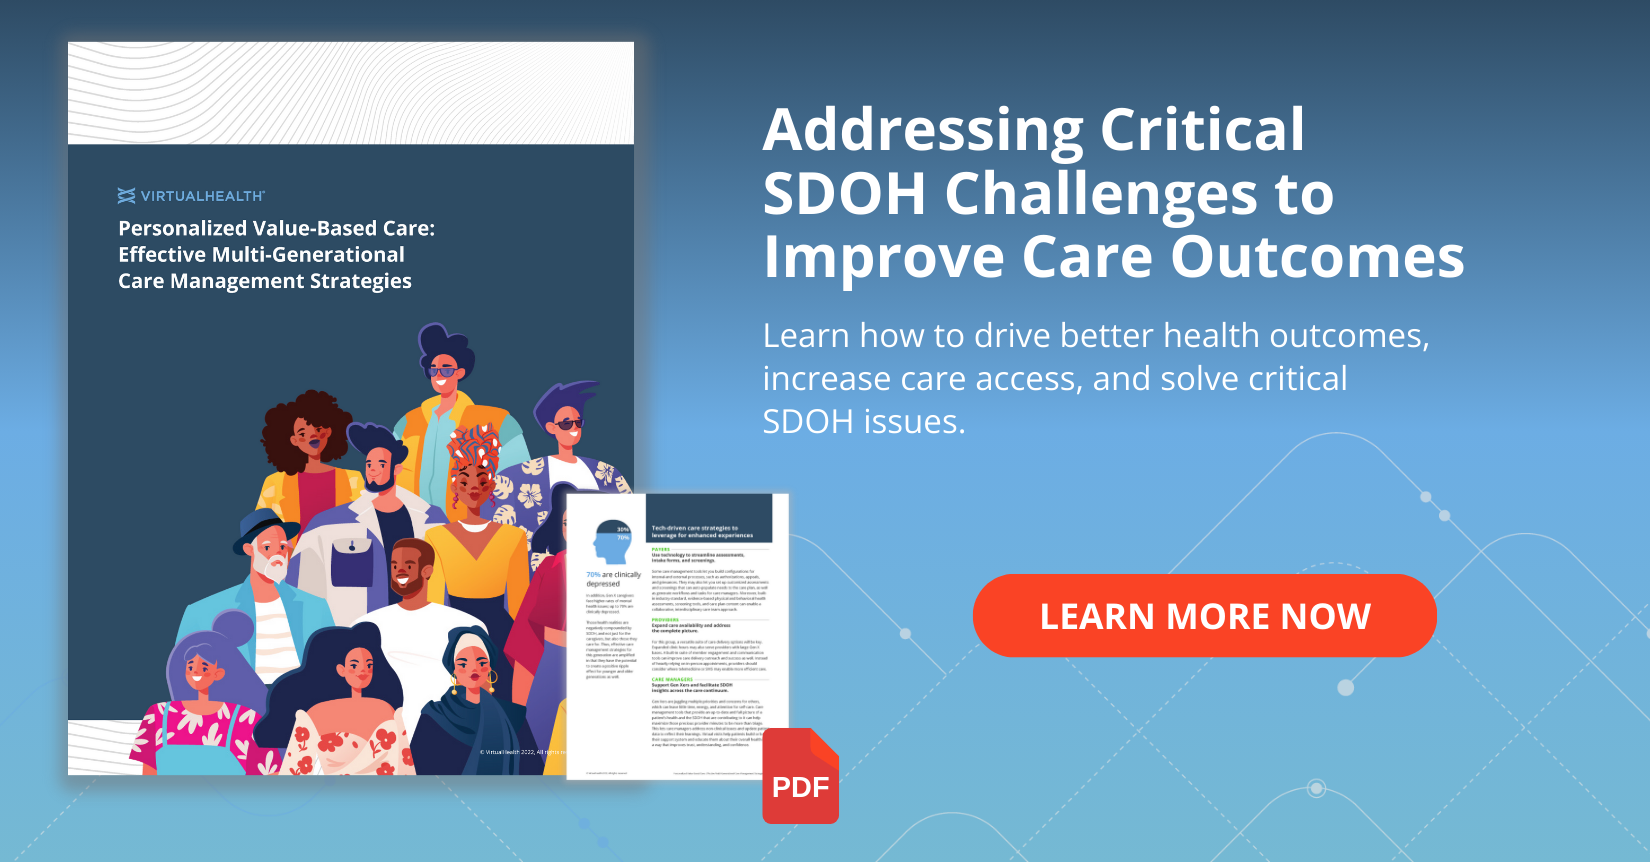 Learn about SDOH solutions for healthcare payors